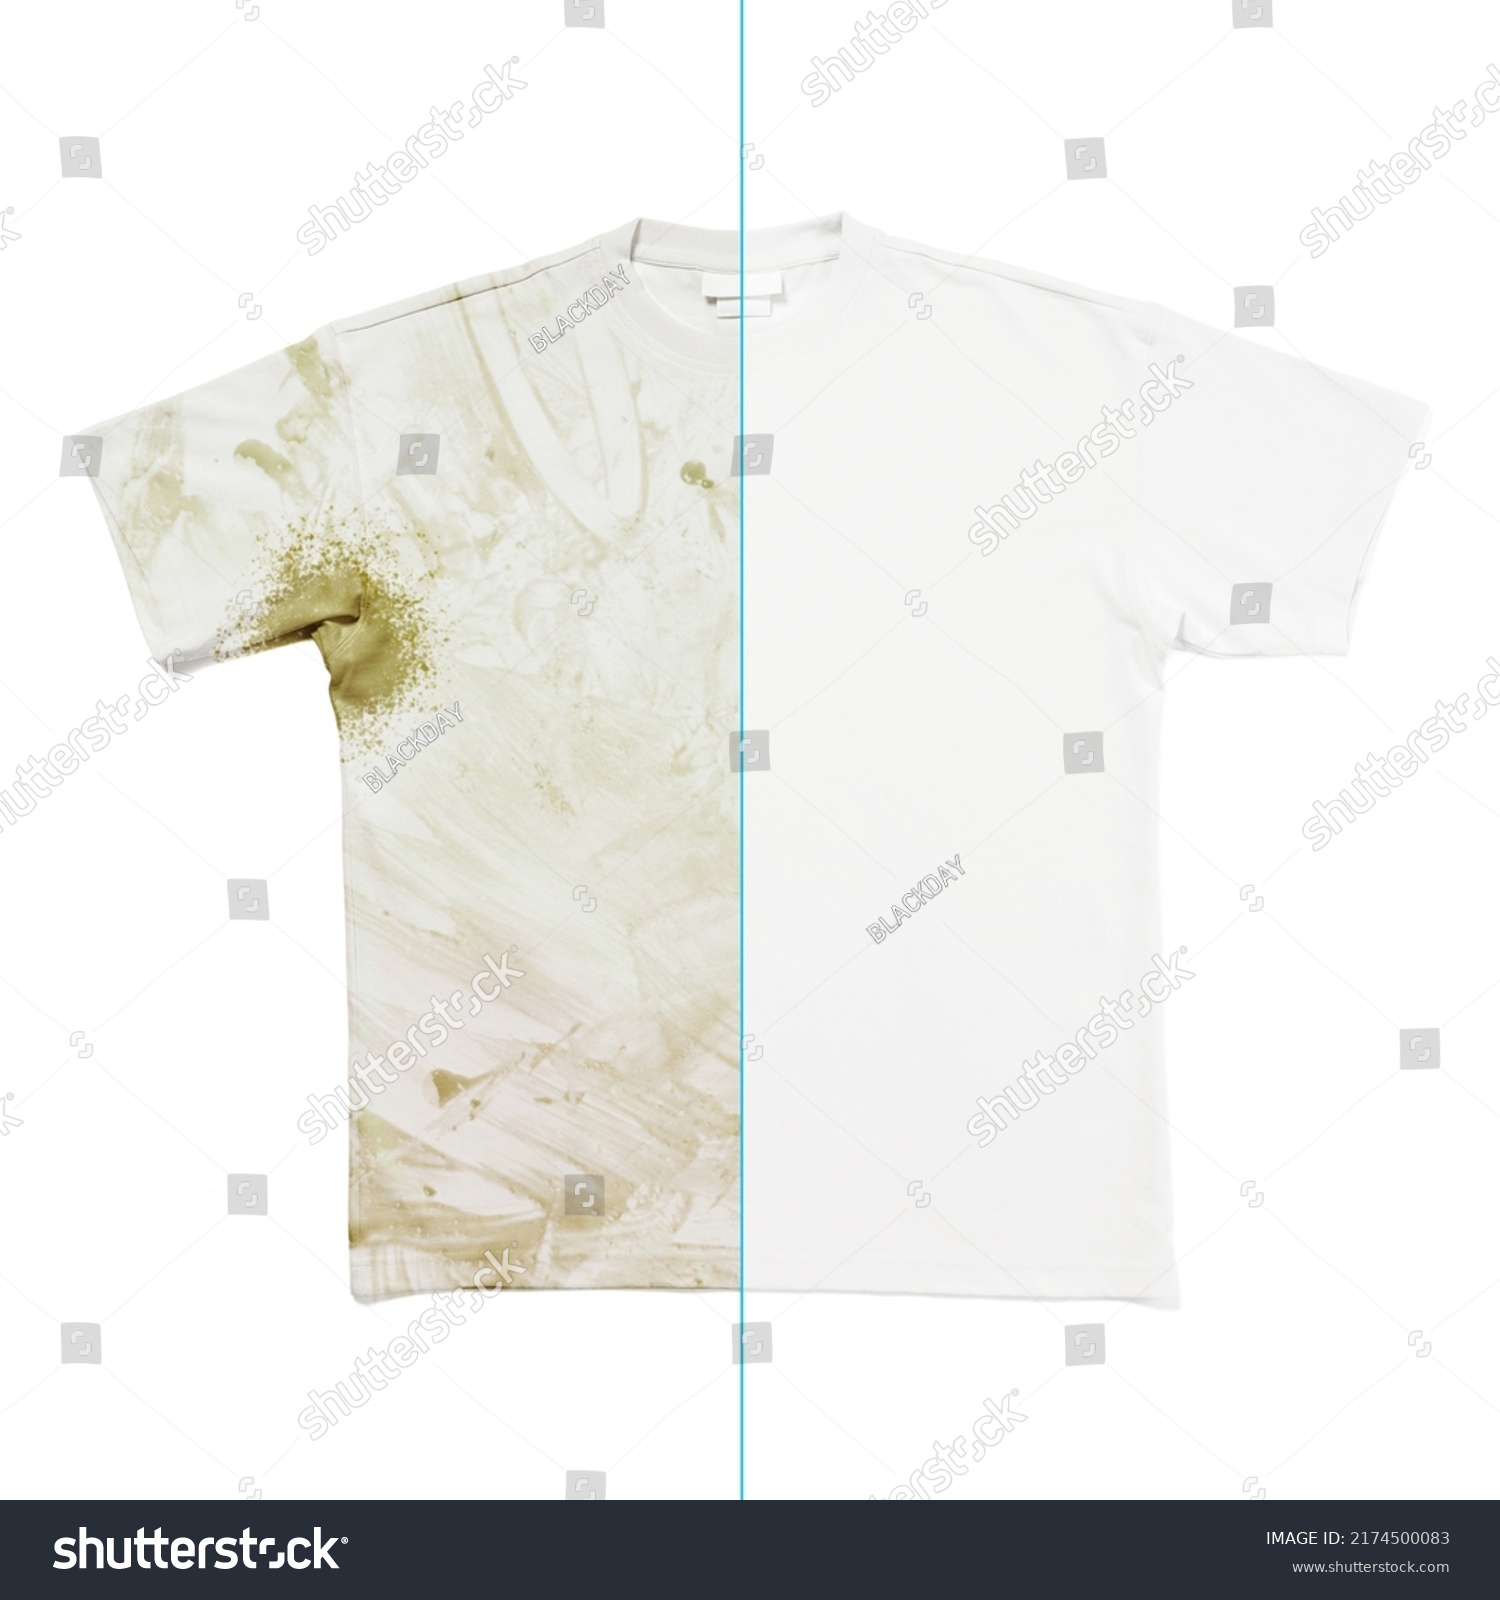 Comparison of white t-shirt before and after using laundry detergent or bleach on white background #2174500083